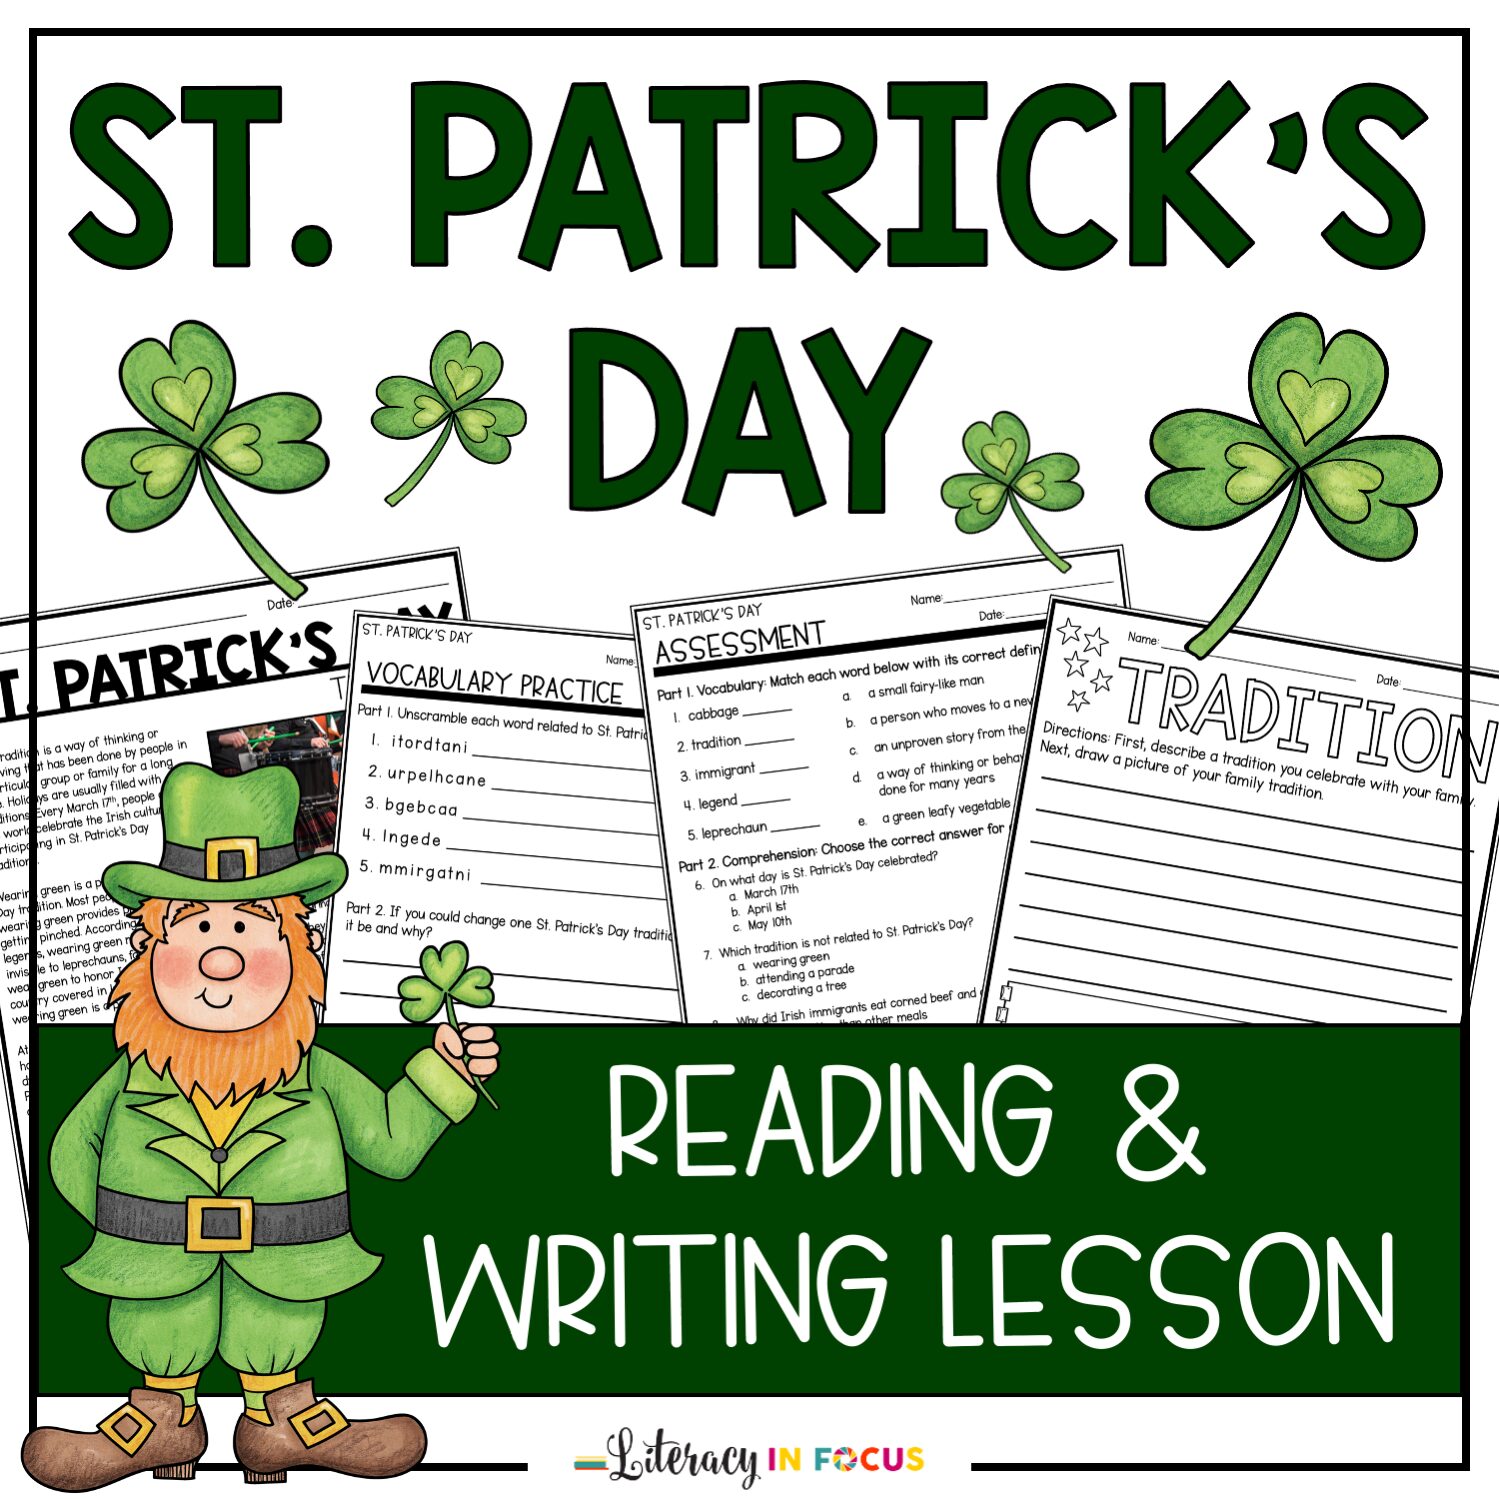 St. Patrick's Day Reading and Writing